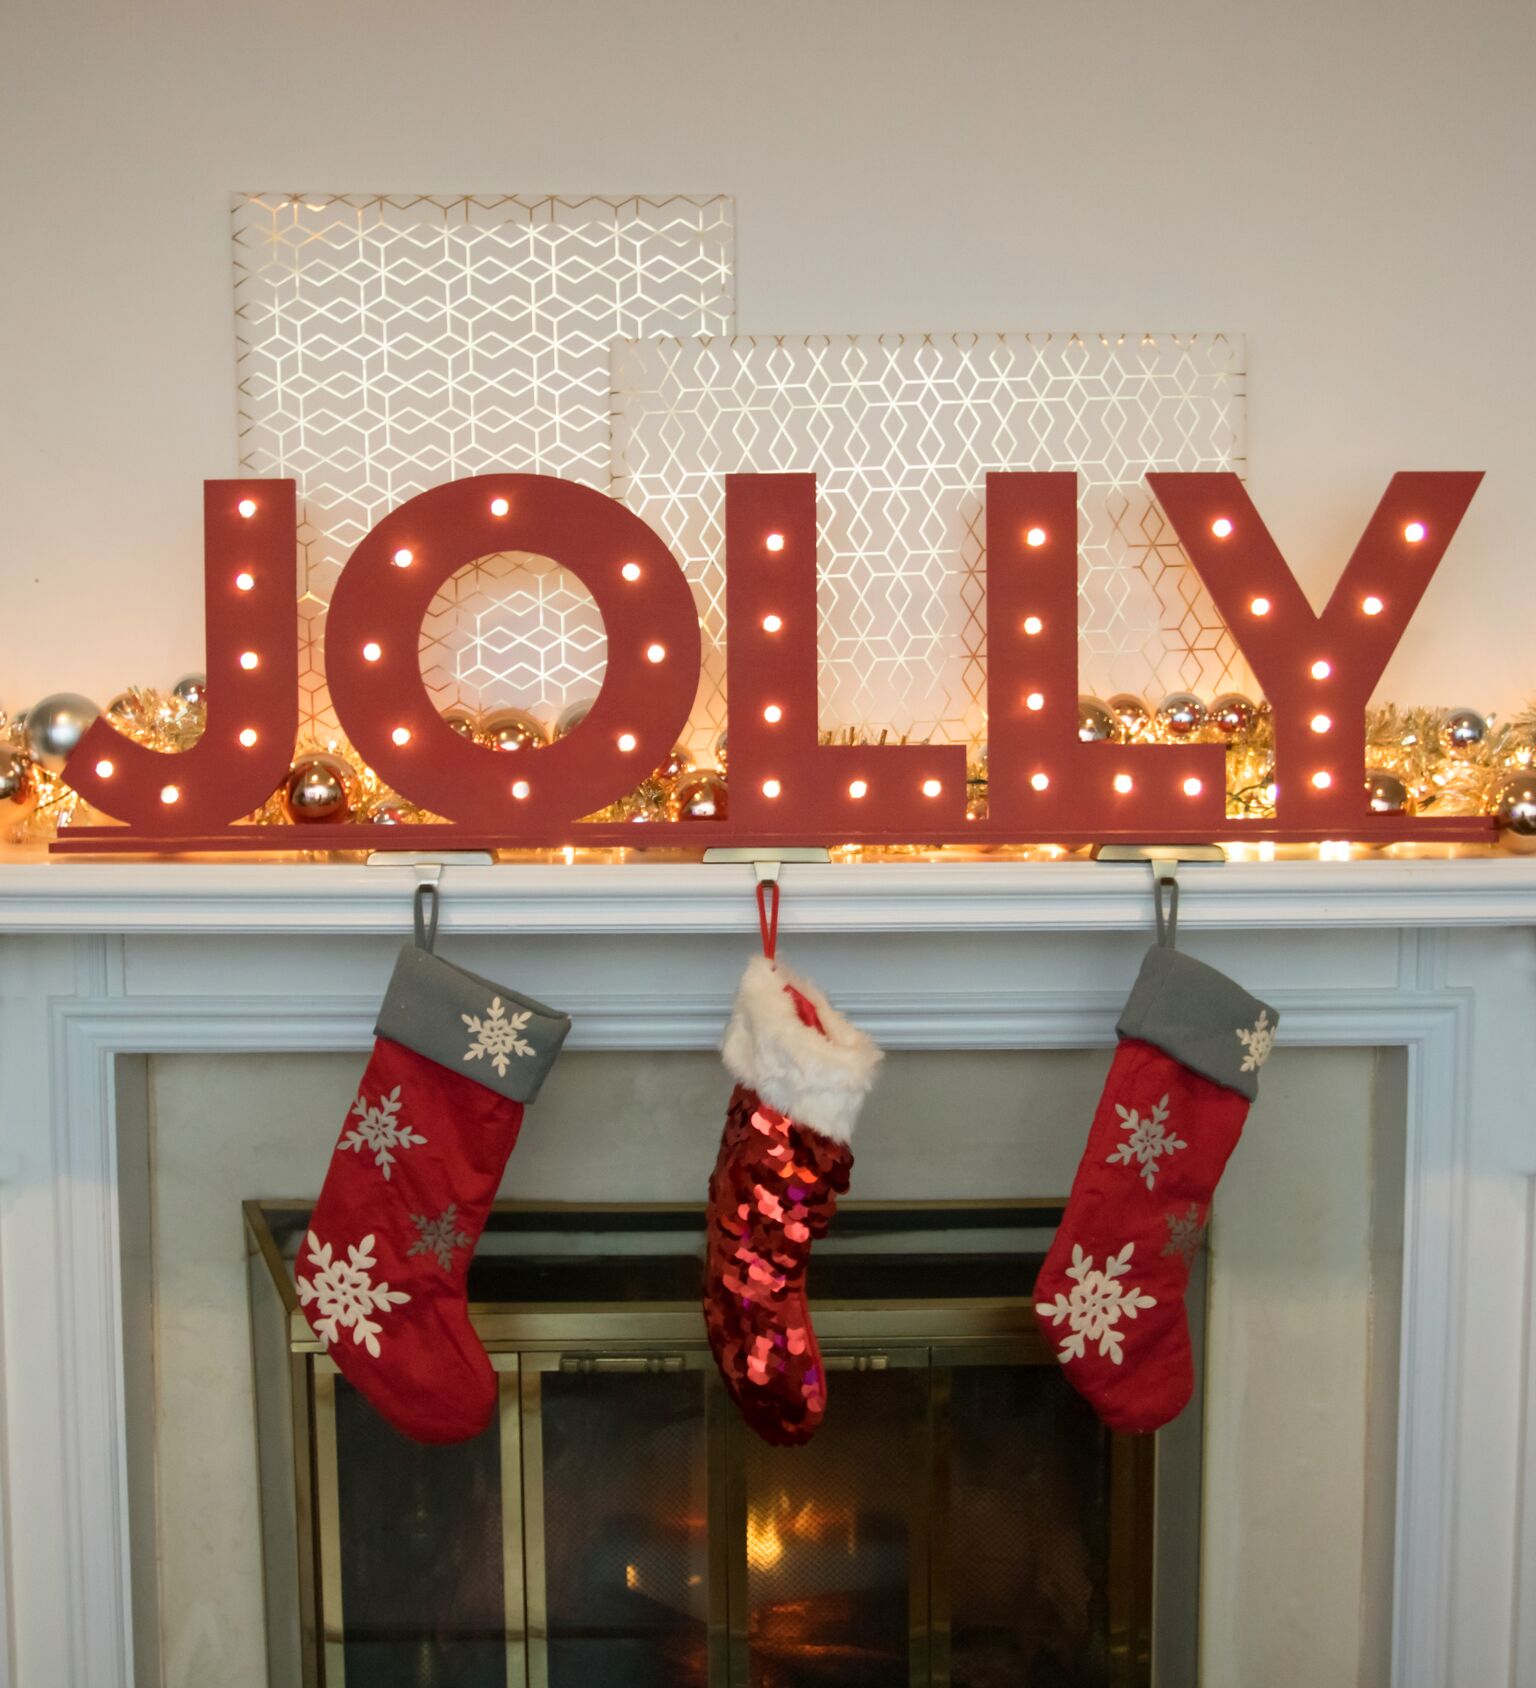 marquee-style signs by bending wire or using wooden letters and then wrapping them with Christmas lights